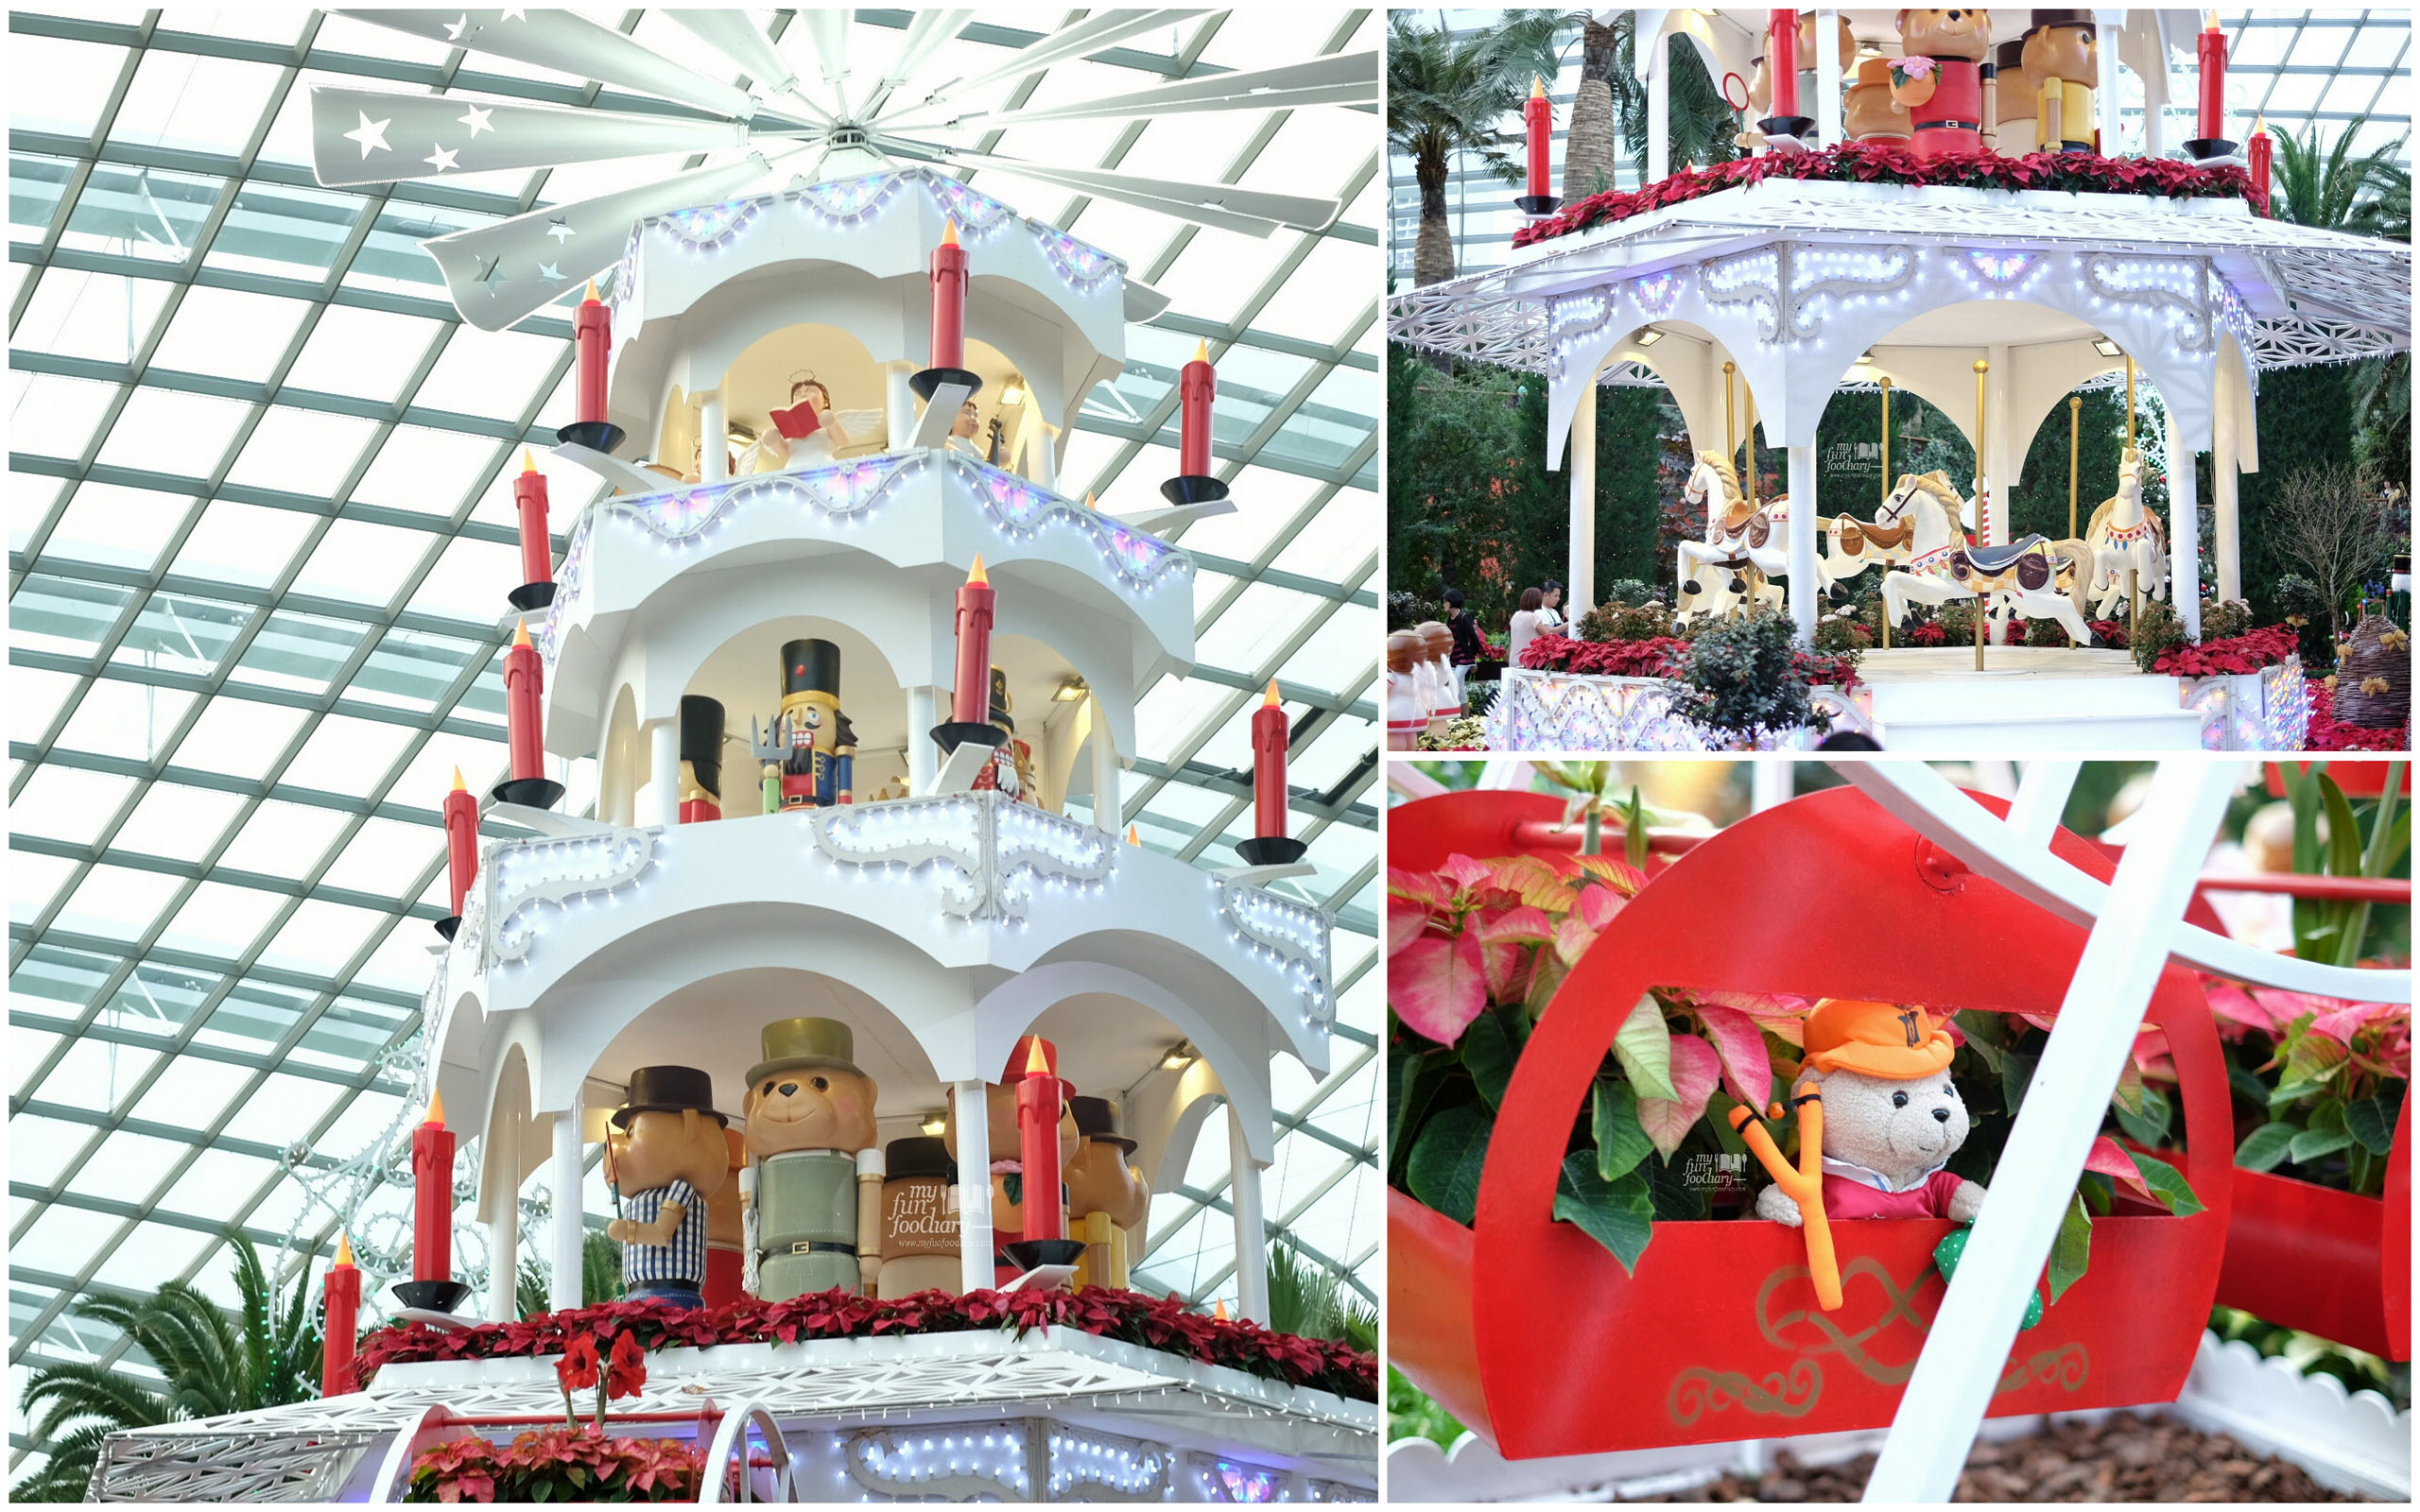 Christmas Toyland at Gardens By The Bay 2015 by Myfunfoodiary